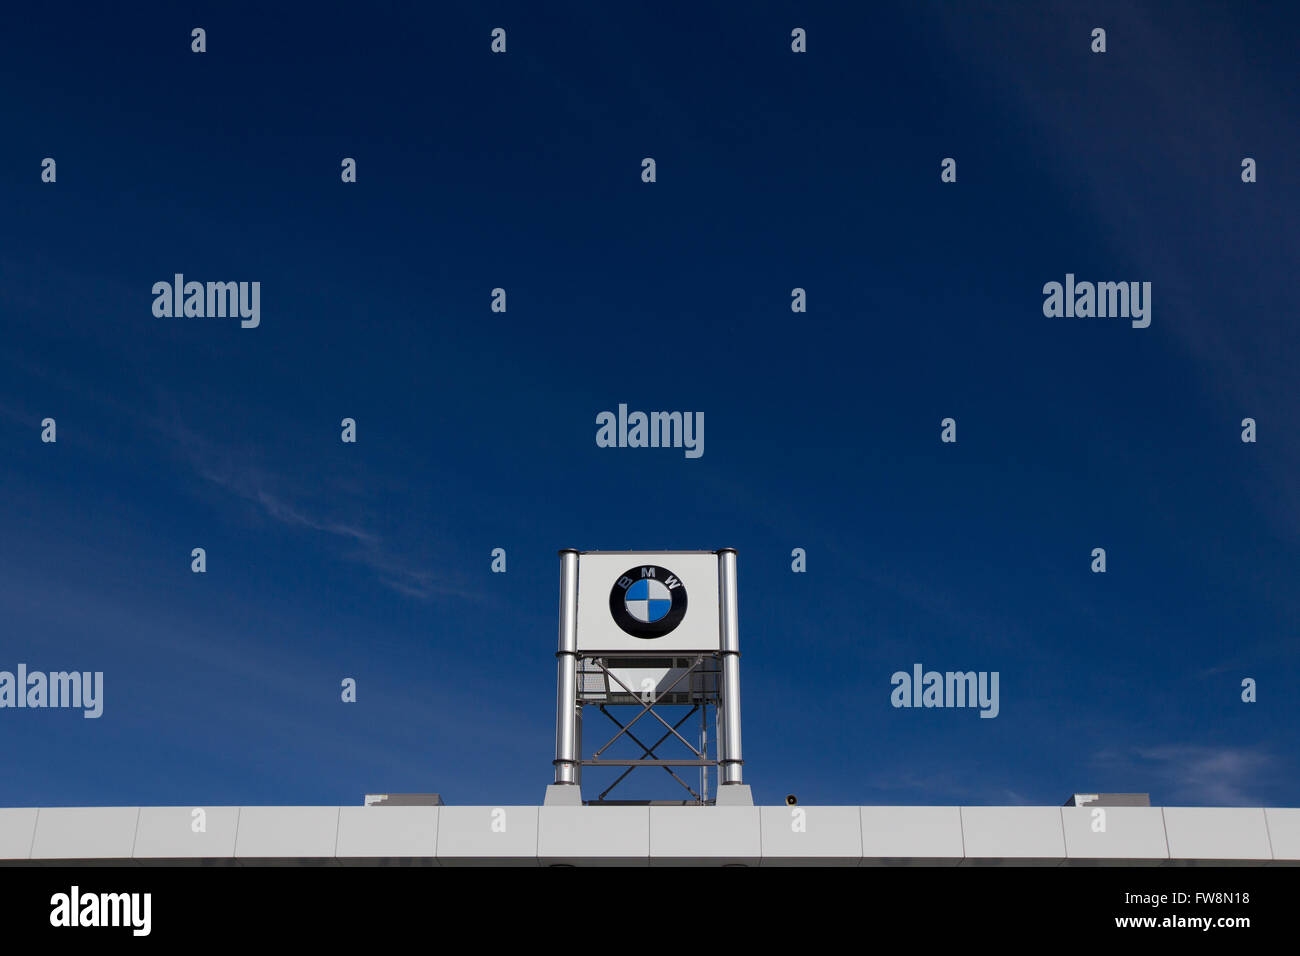 The BMW dealer in Kingston, Ont., on Oct. 1, 2015. Stock Photo